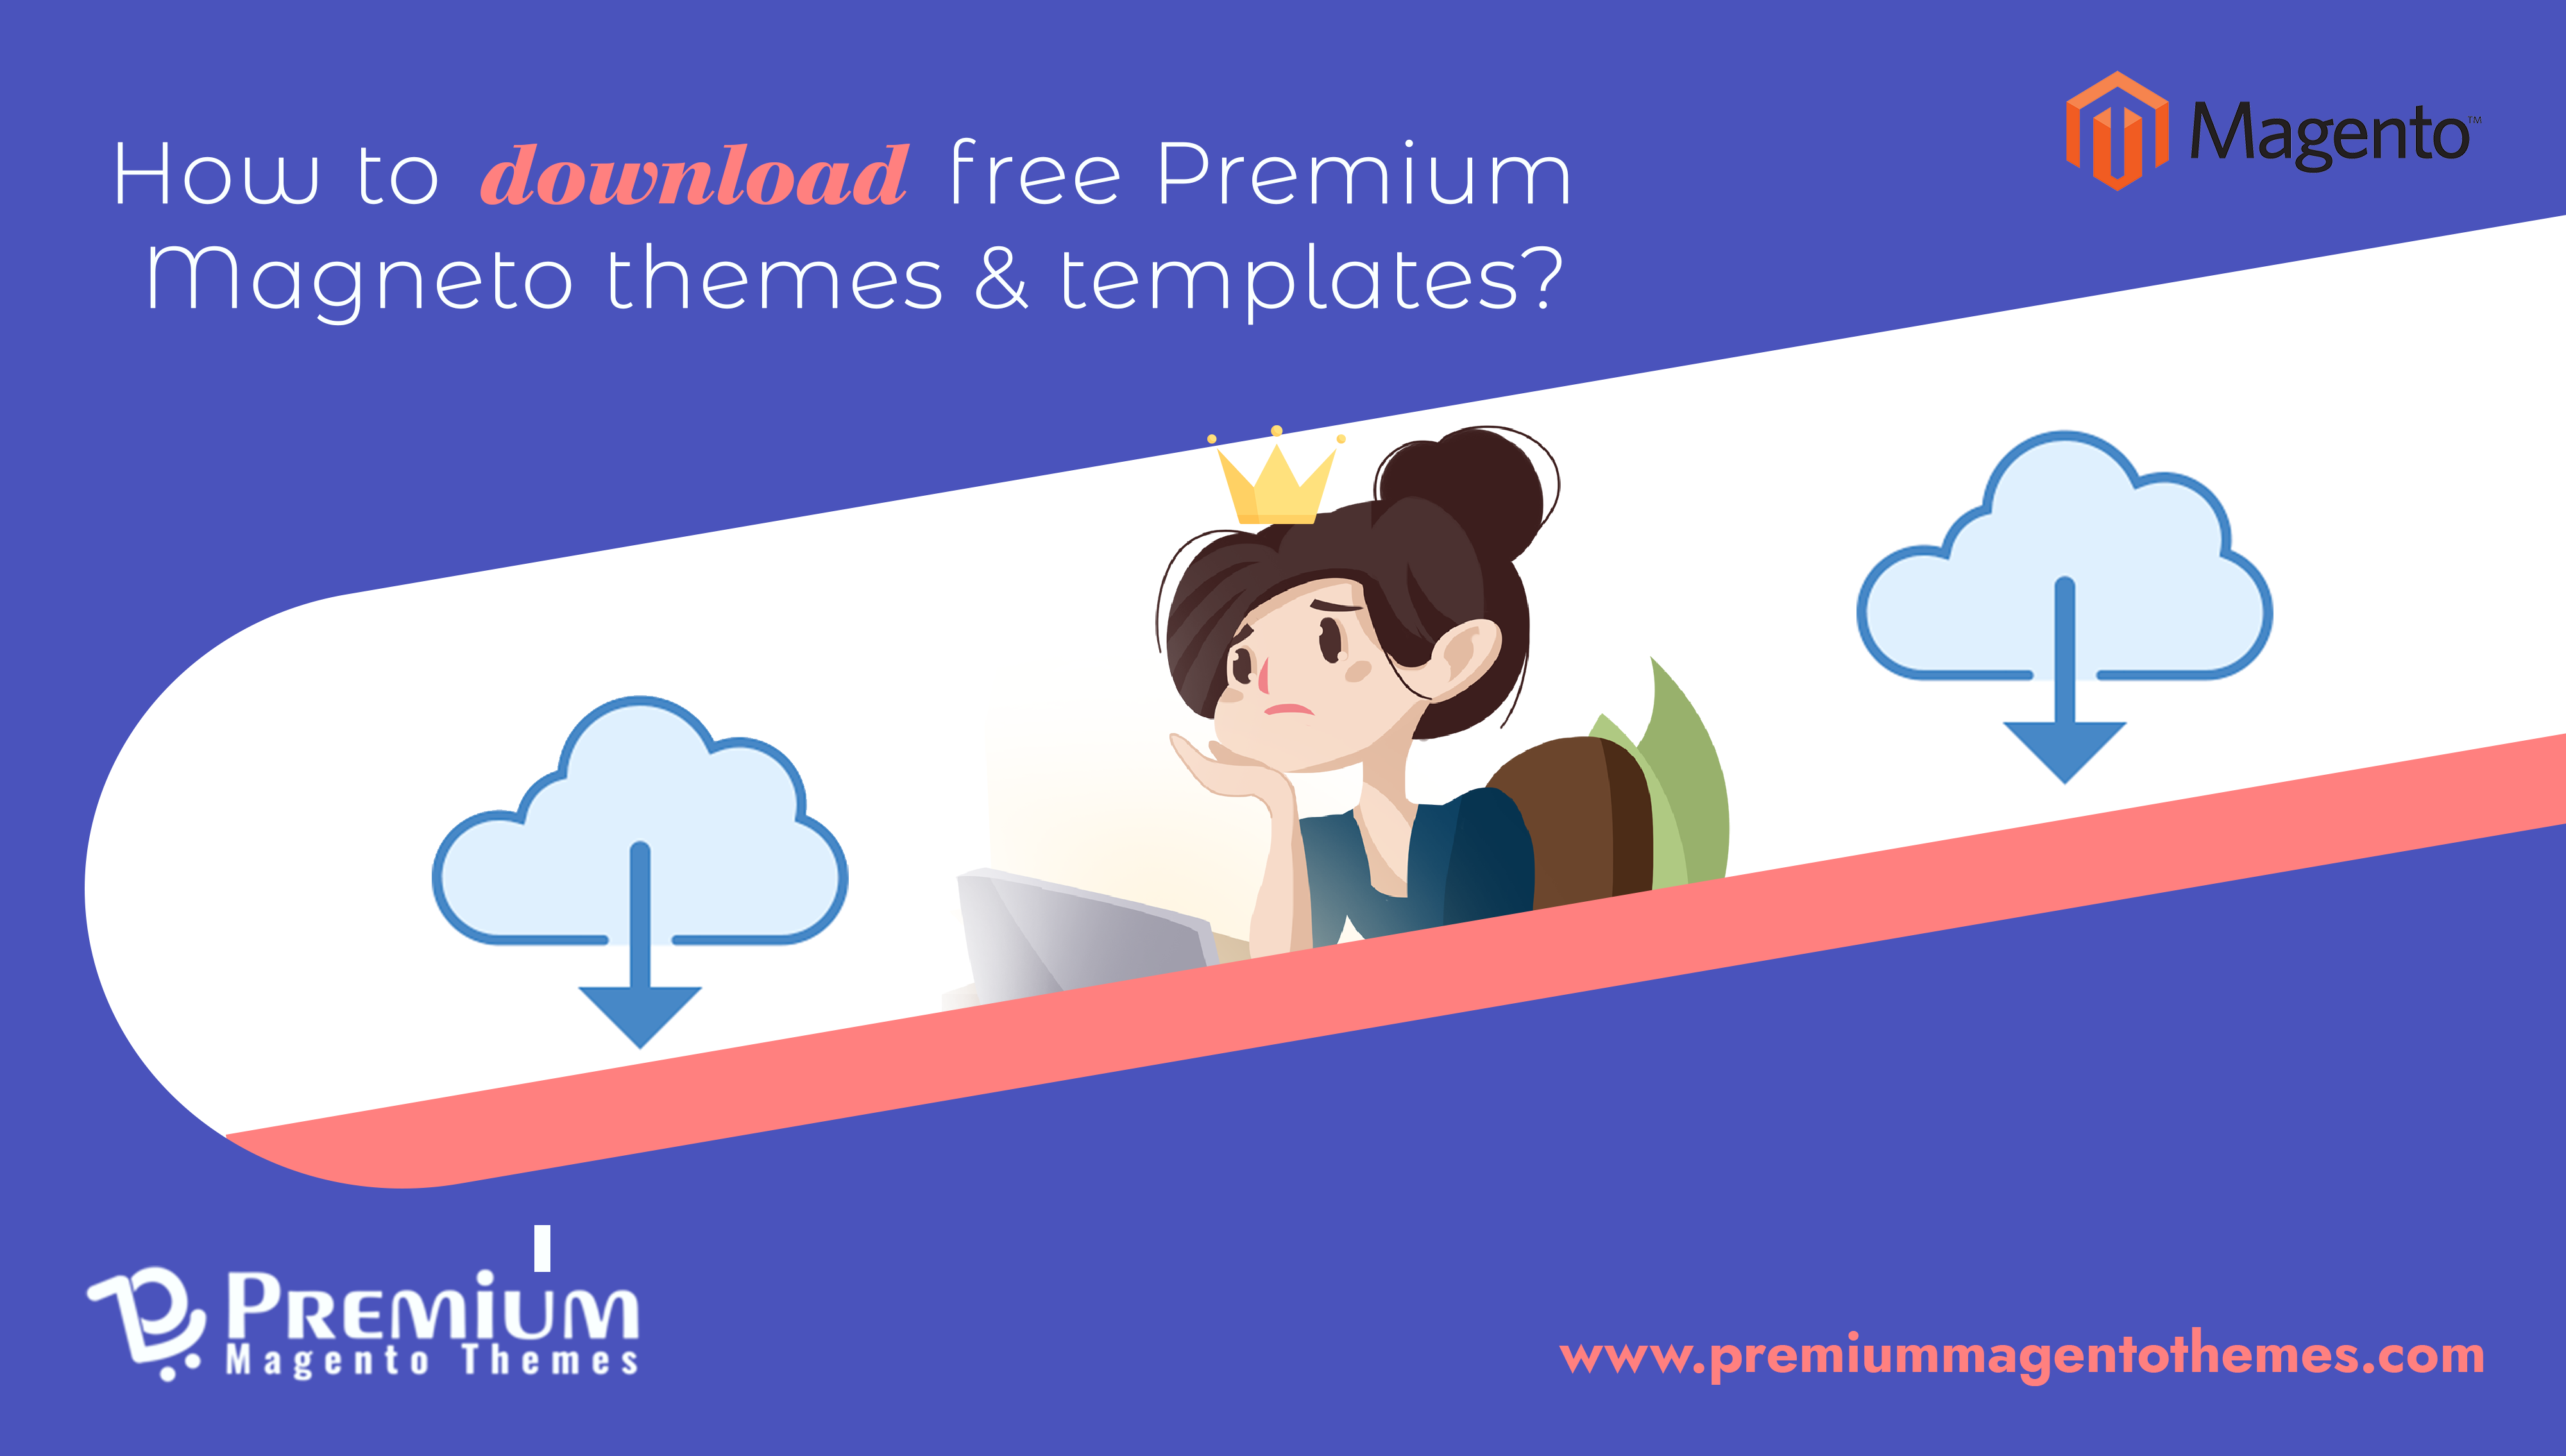 How to download a free premium Magento theme & template